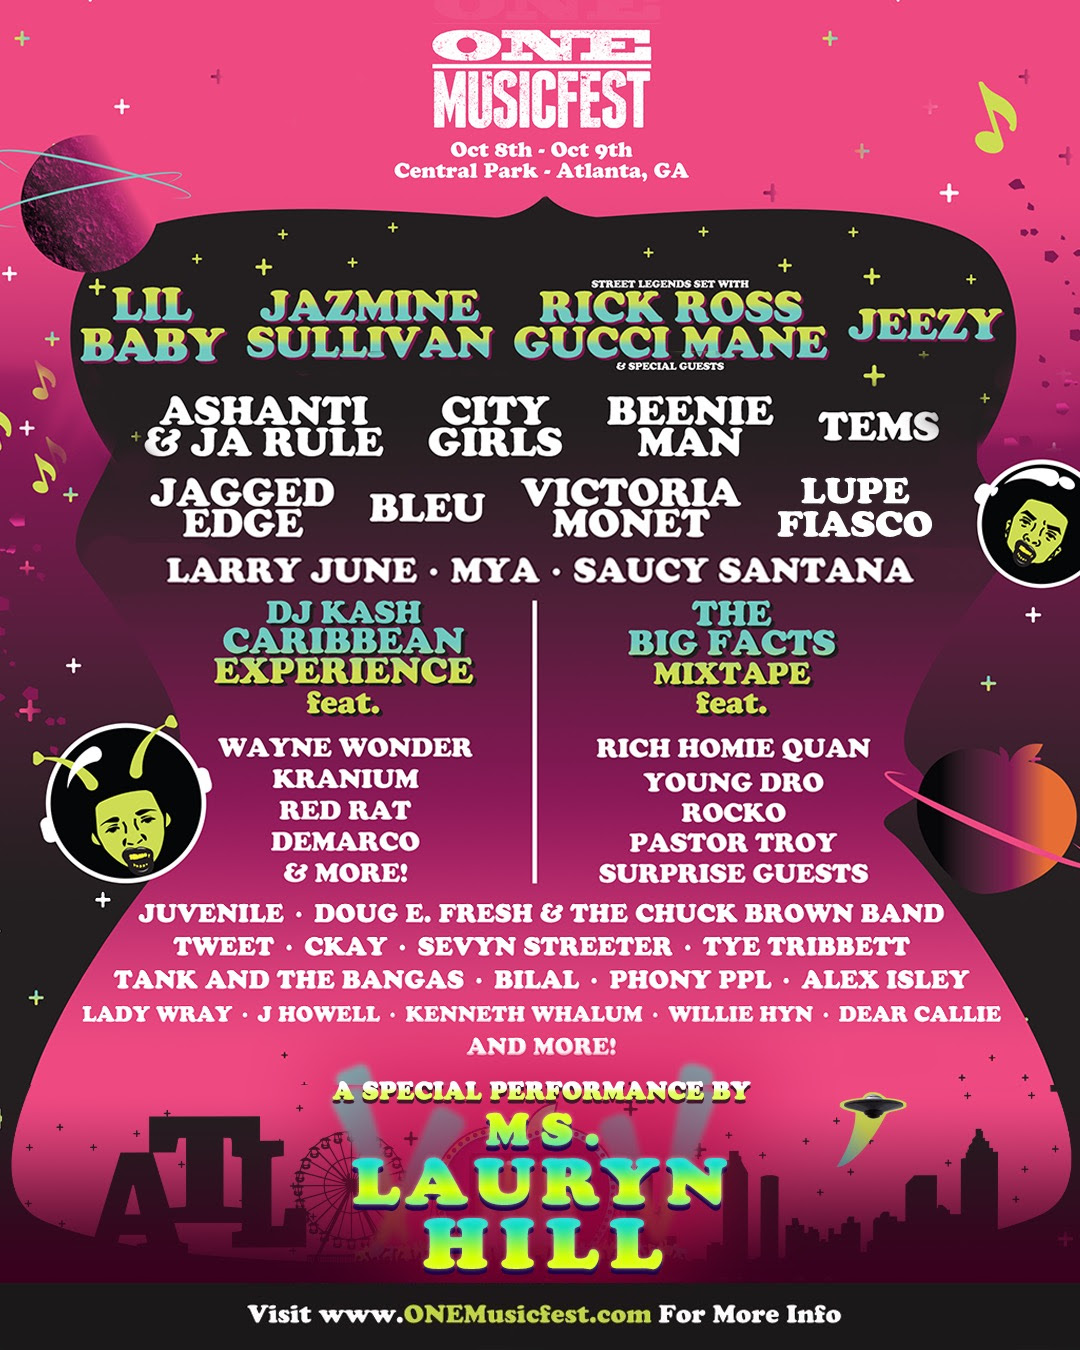 ONE MusicFest Announces Festival Lineup with Lil Baby, Ms. Lauryn Hill